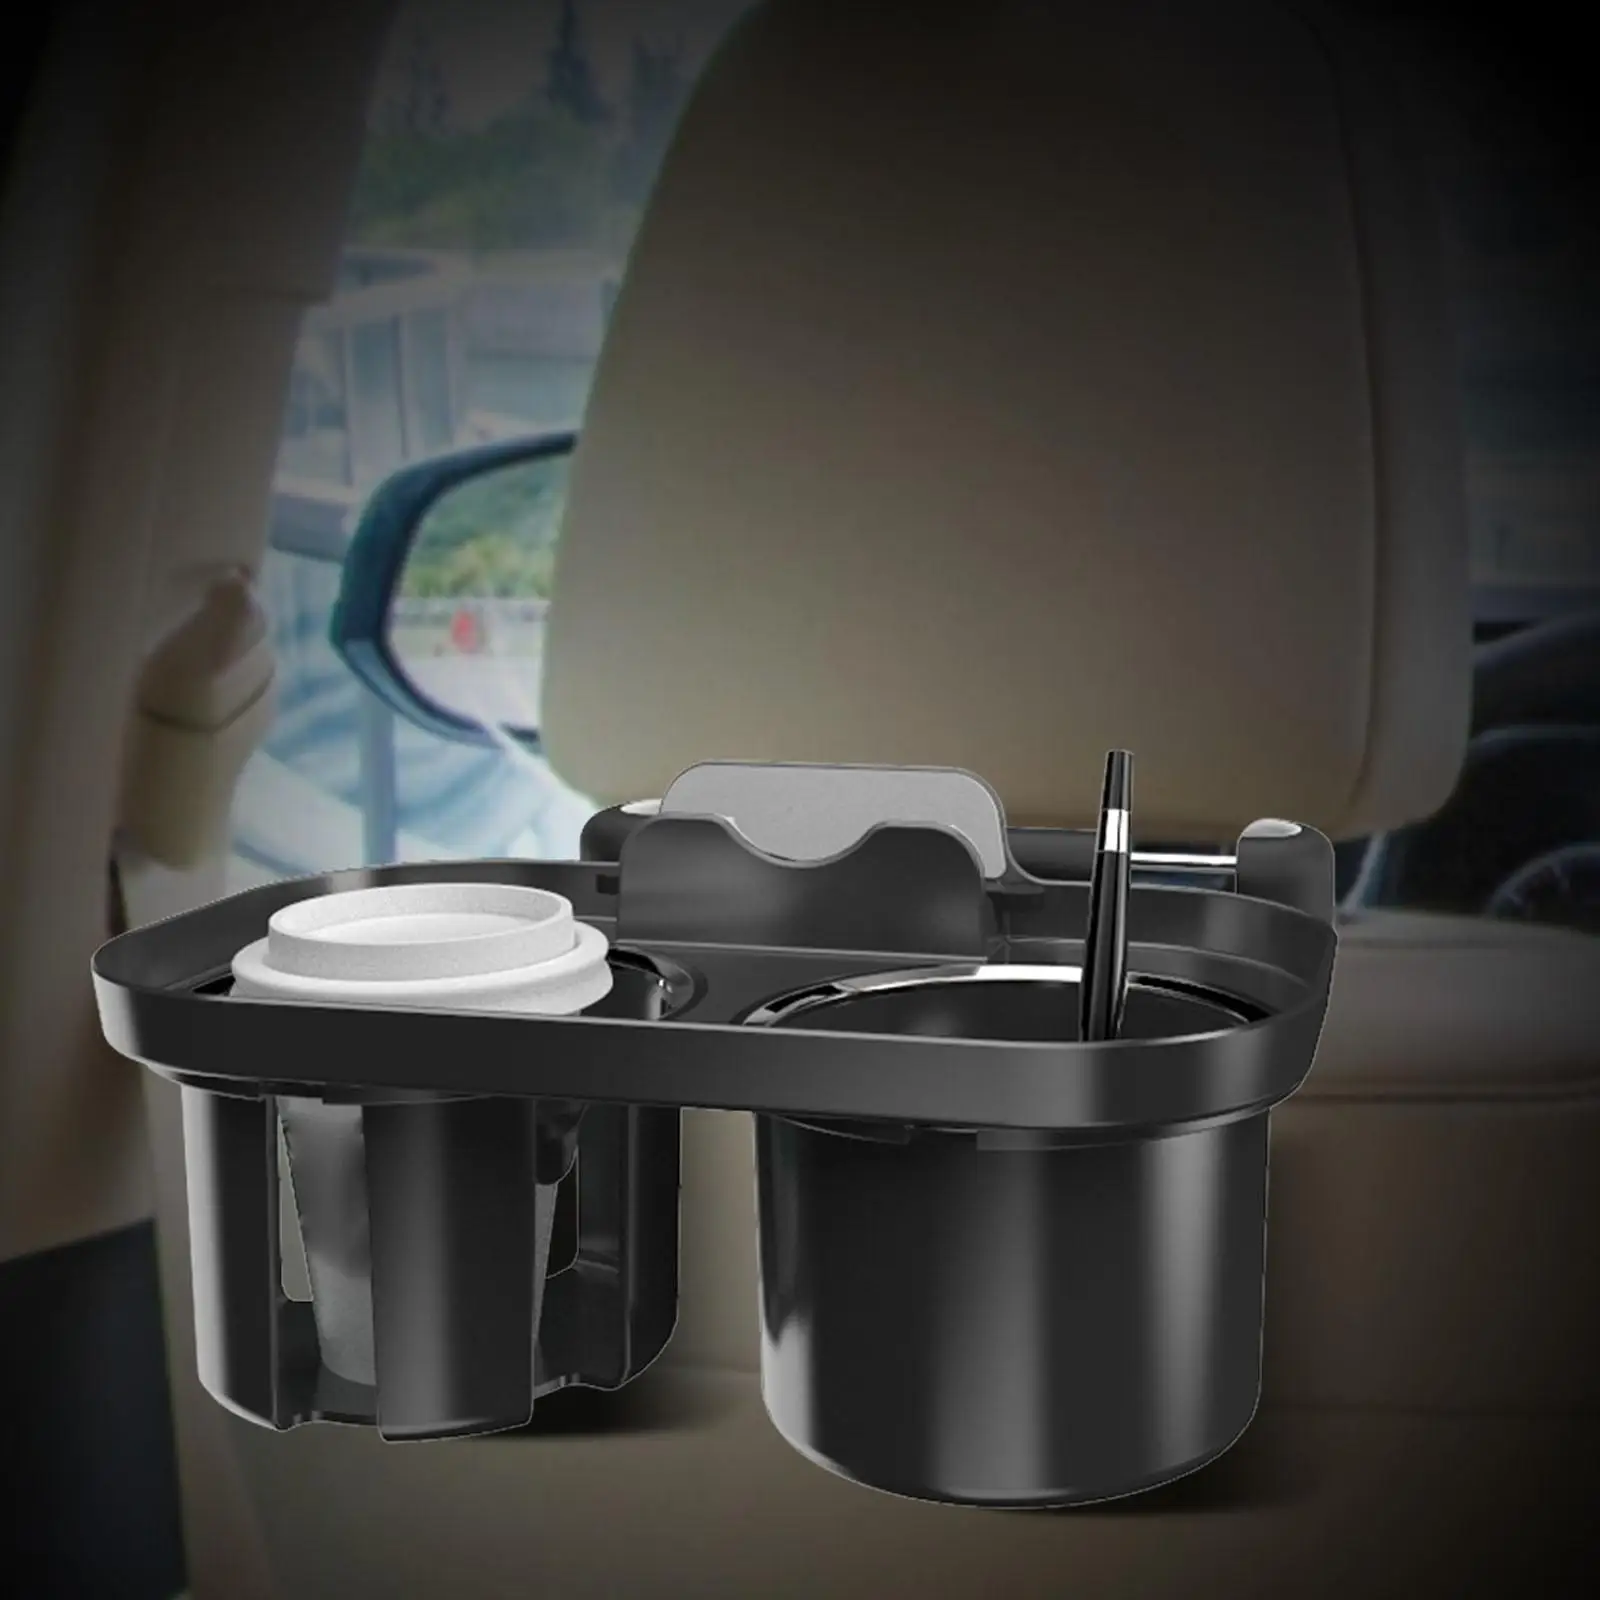 Universal Car Cup Holder Multifunctional Practical Durable Snack Tray Seat Back